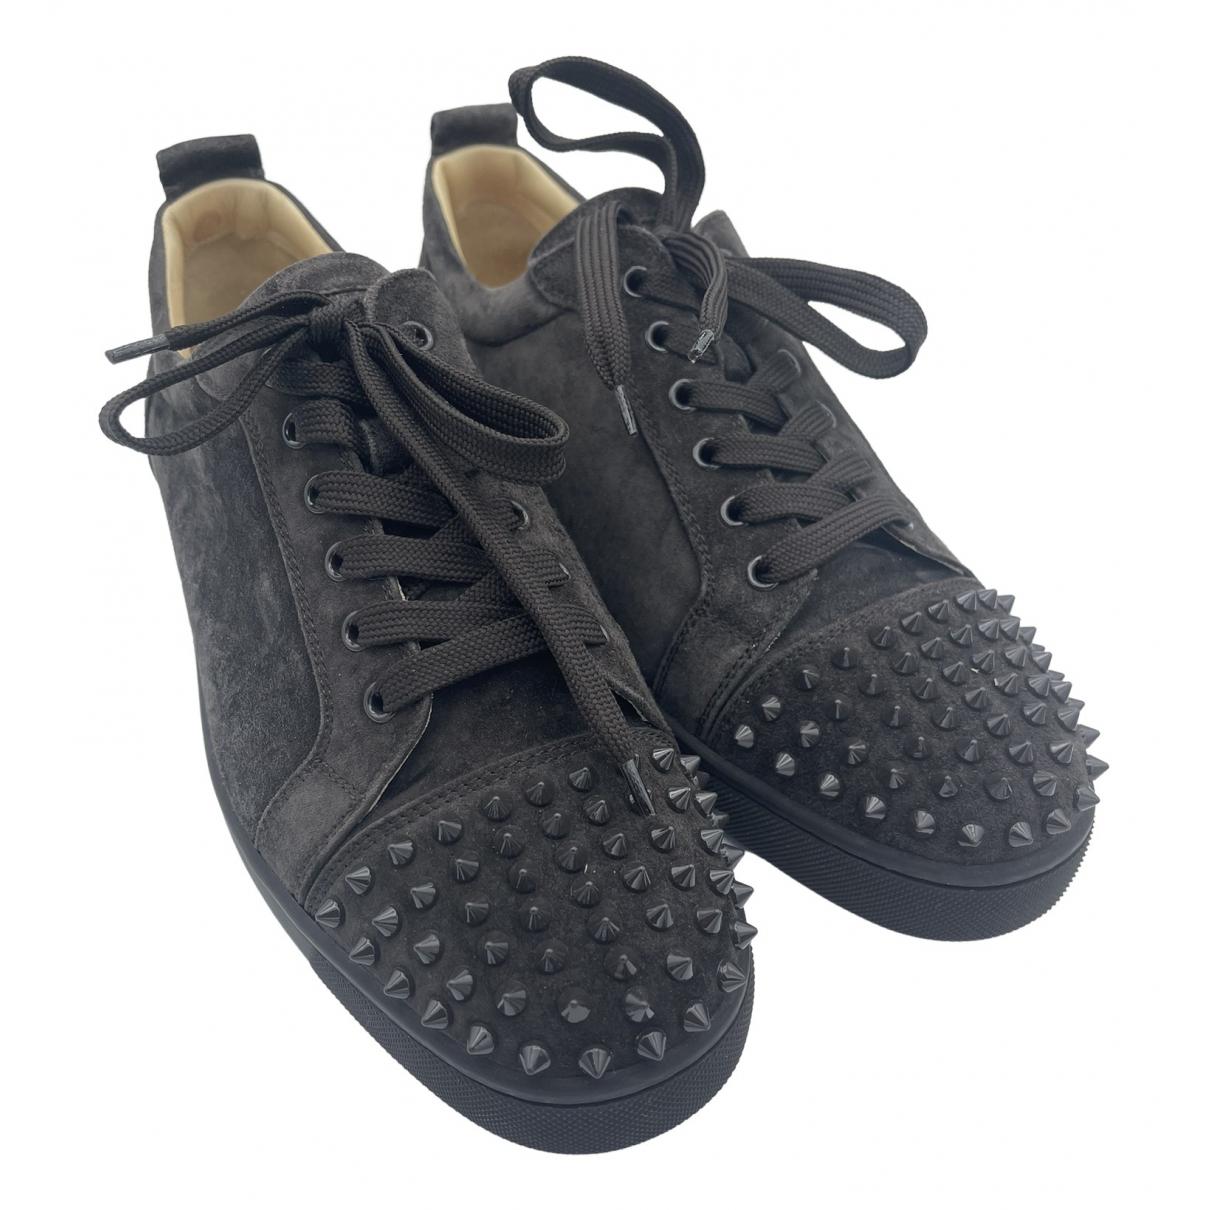 Trainers Christian Louboutin - Louis Junior Spike Orlando sneakers